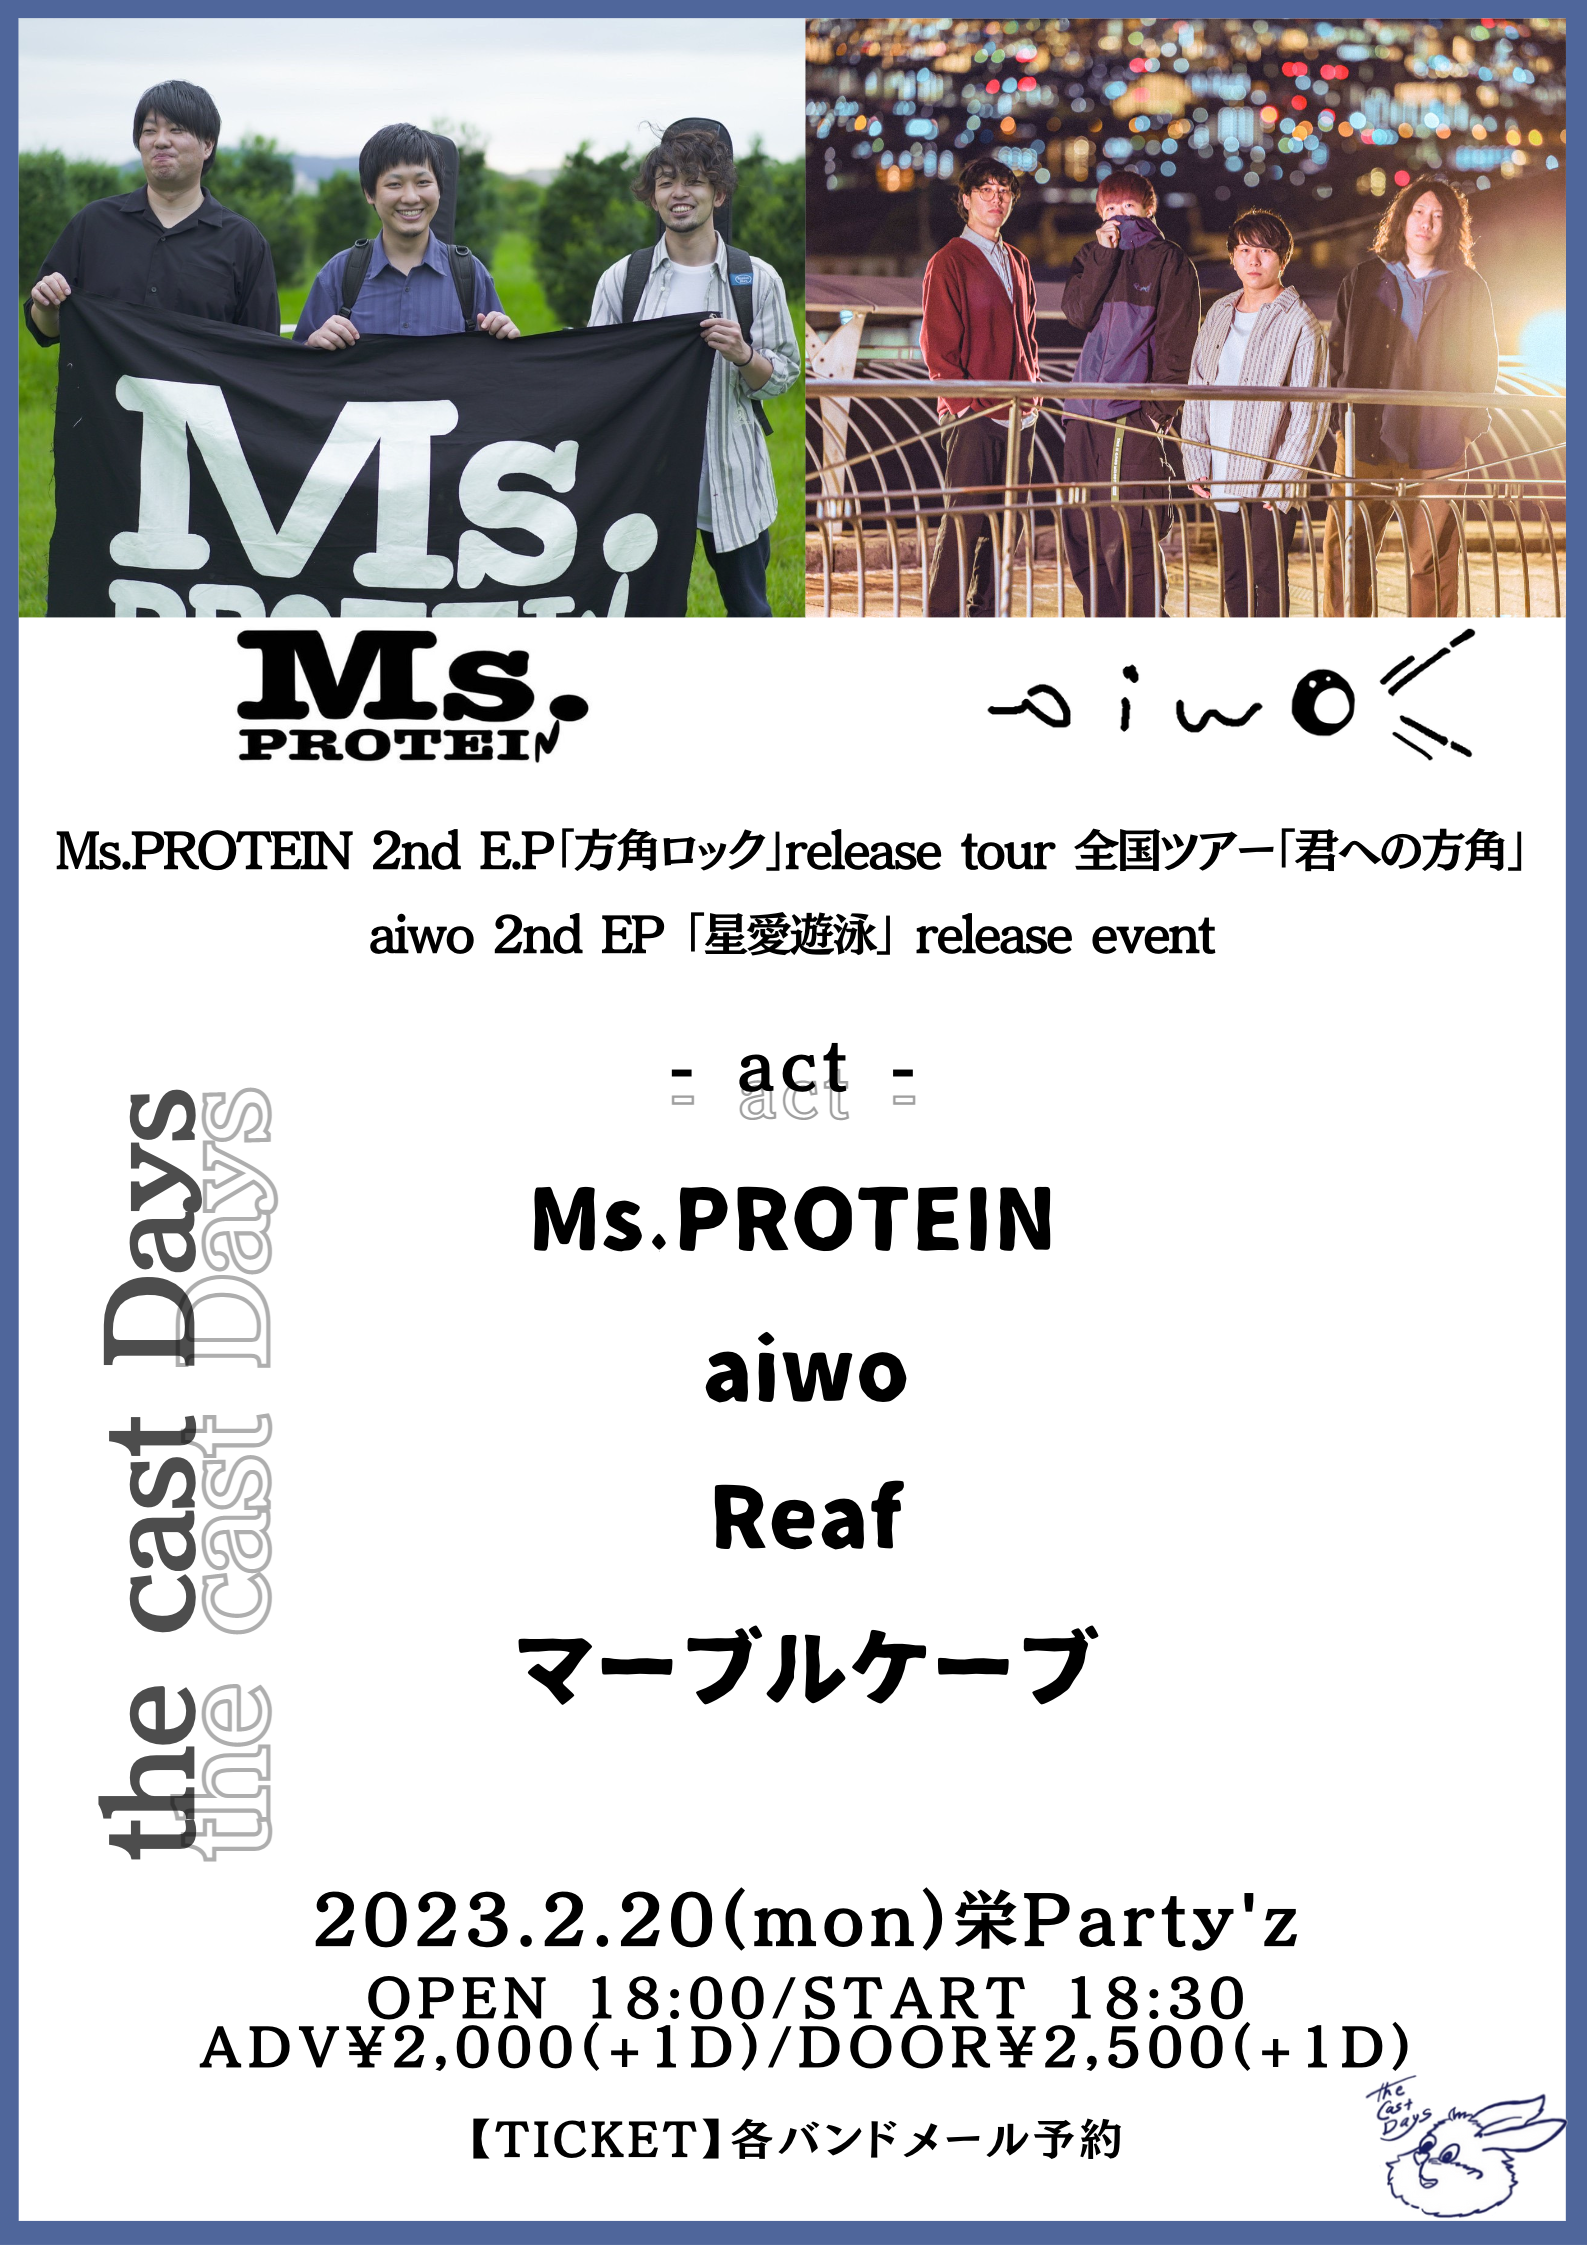 Ms.PROTEIN 2nd E.P.「方角ロック」リリースツアー 全国ツアー「君への方角」 aiwo 2nd EP  『星愛遊泳』release event